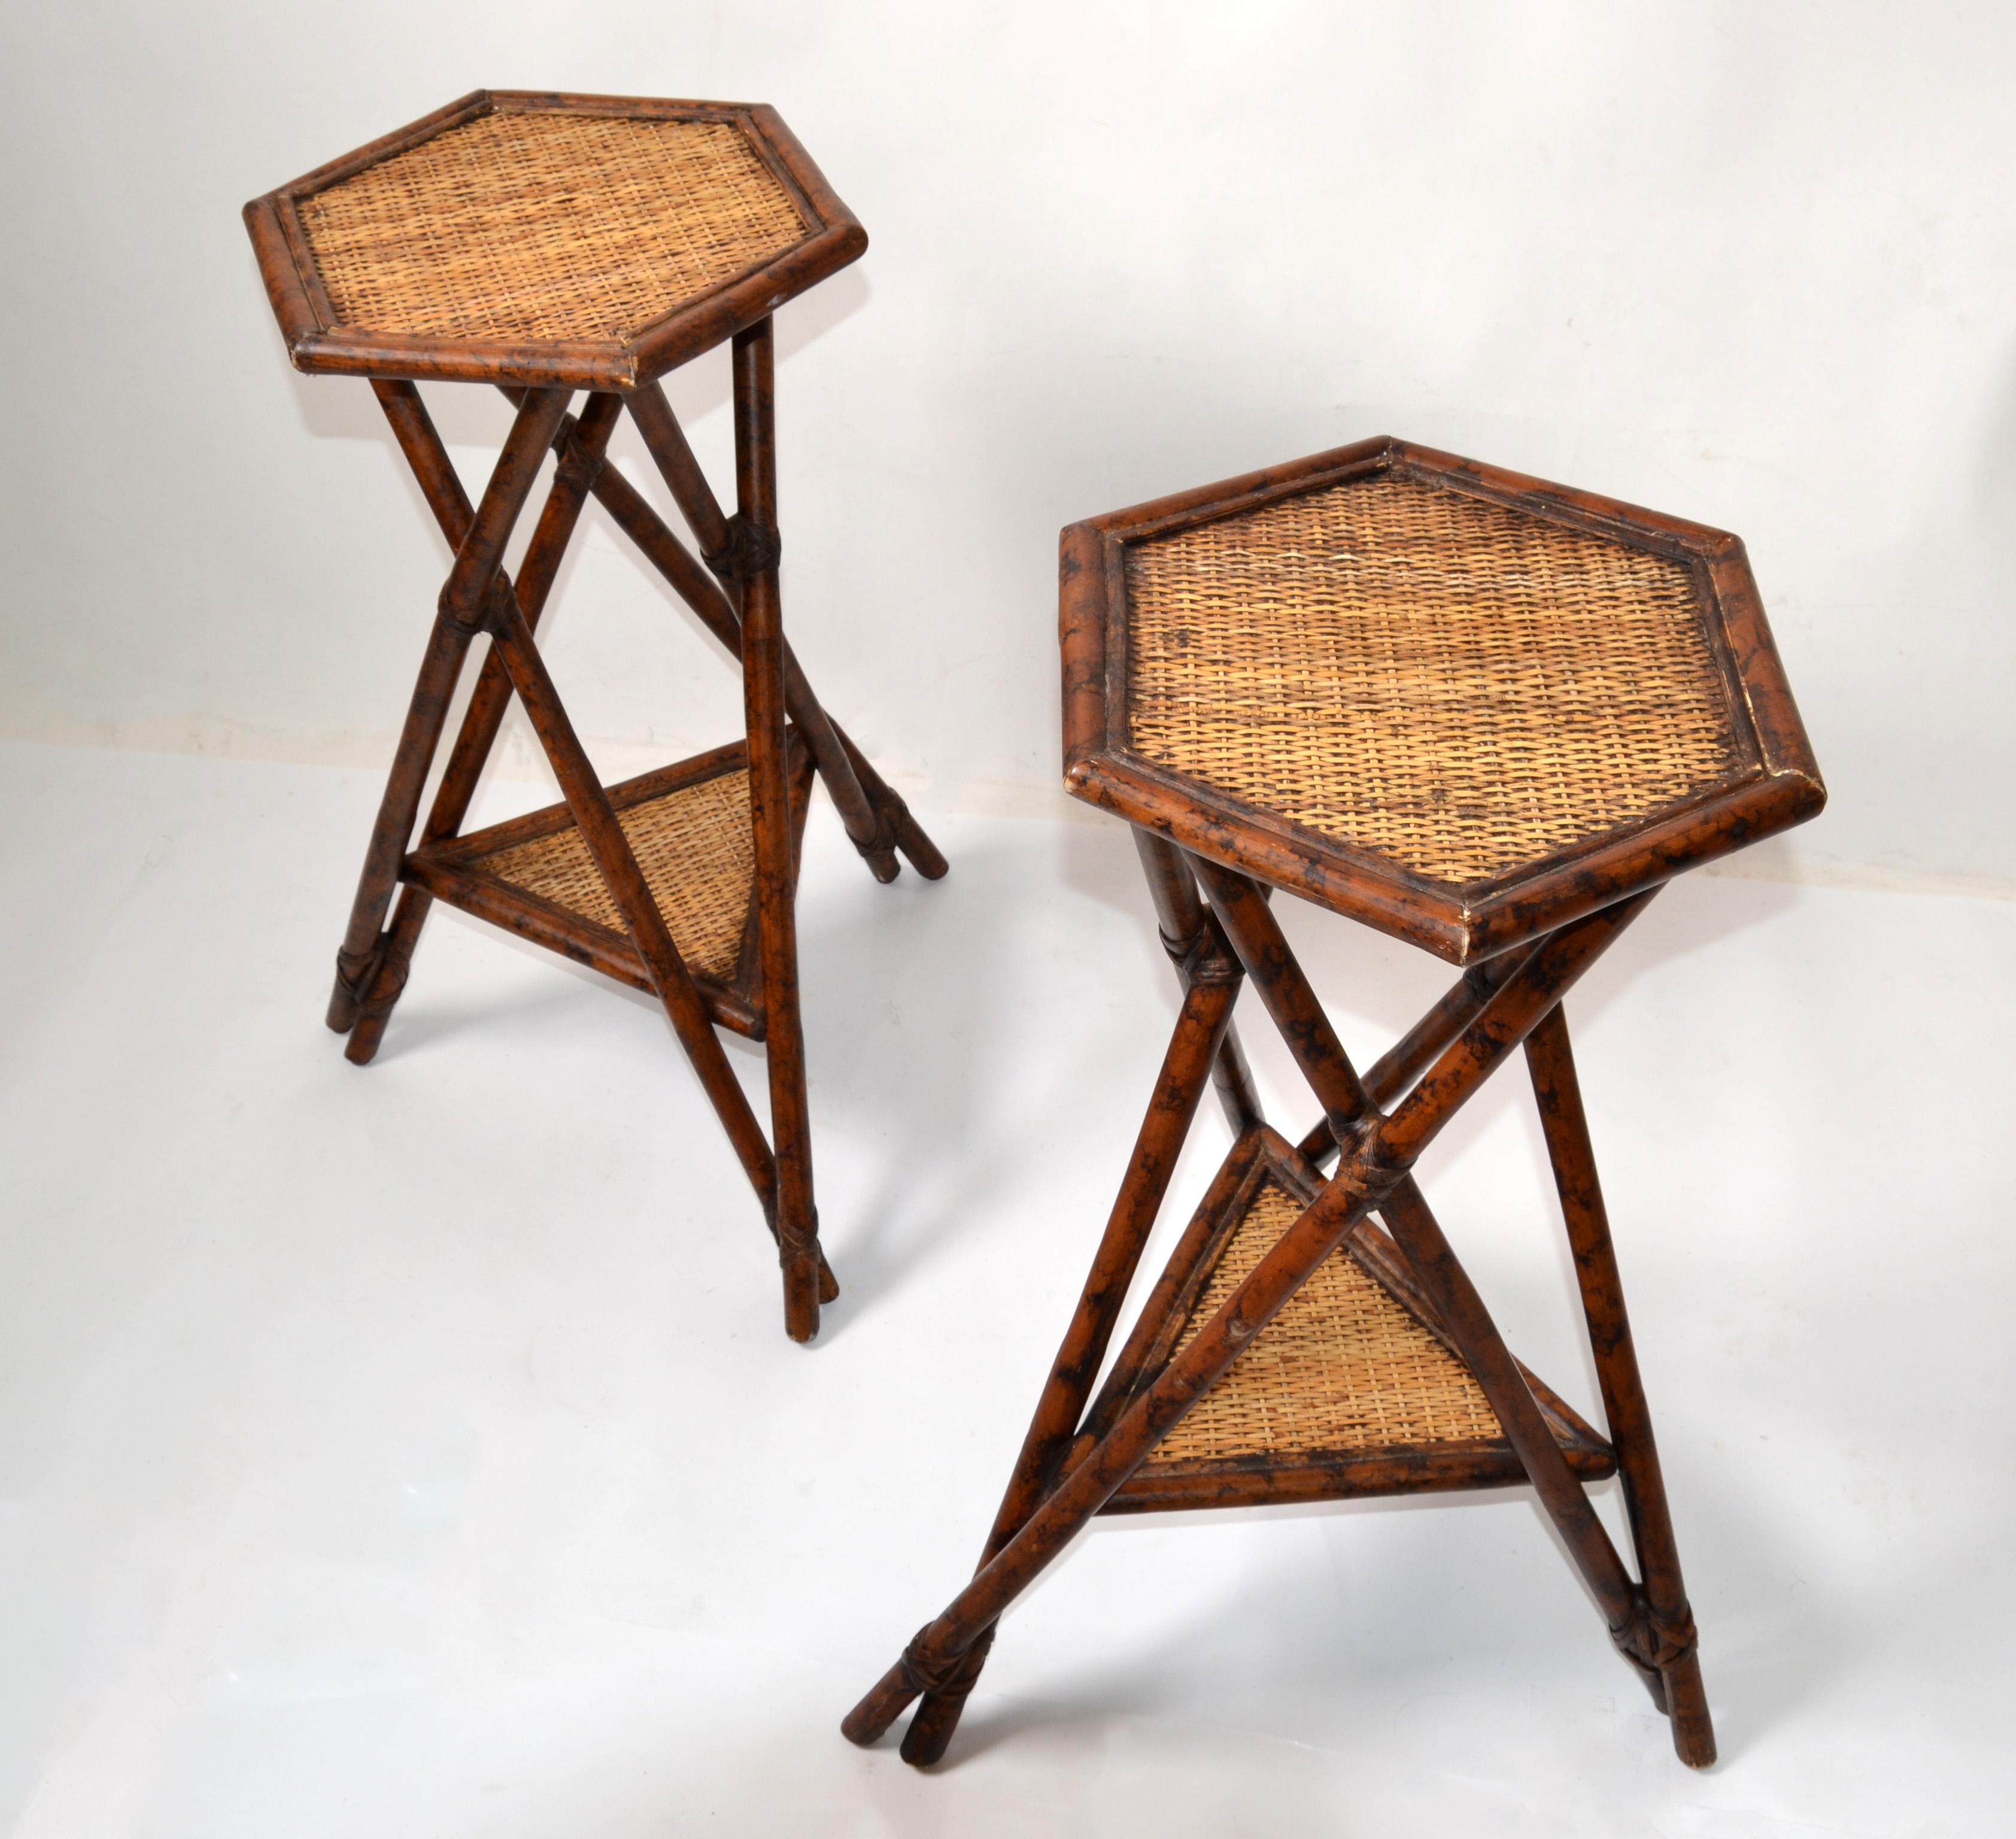 Hand-Crafted 2 Asian Modern Octagonal Wicker Rattan Drink, Side Table Pedestal Bohemian Chic